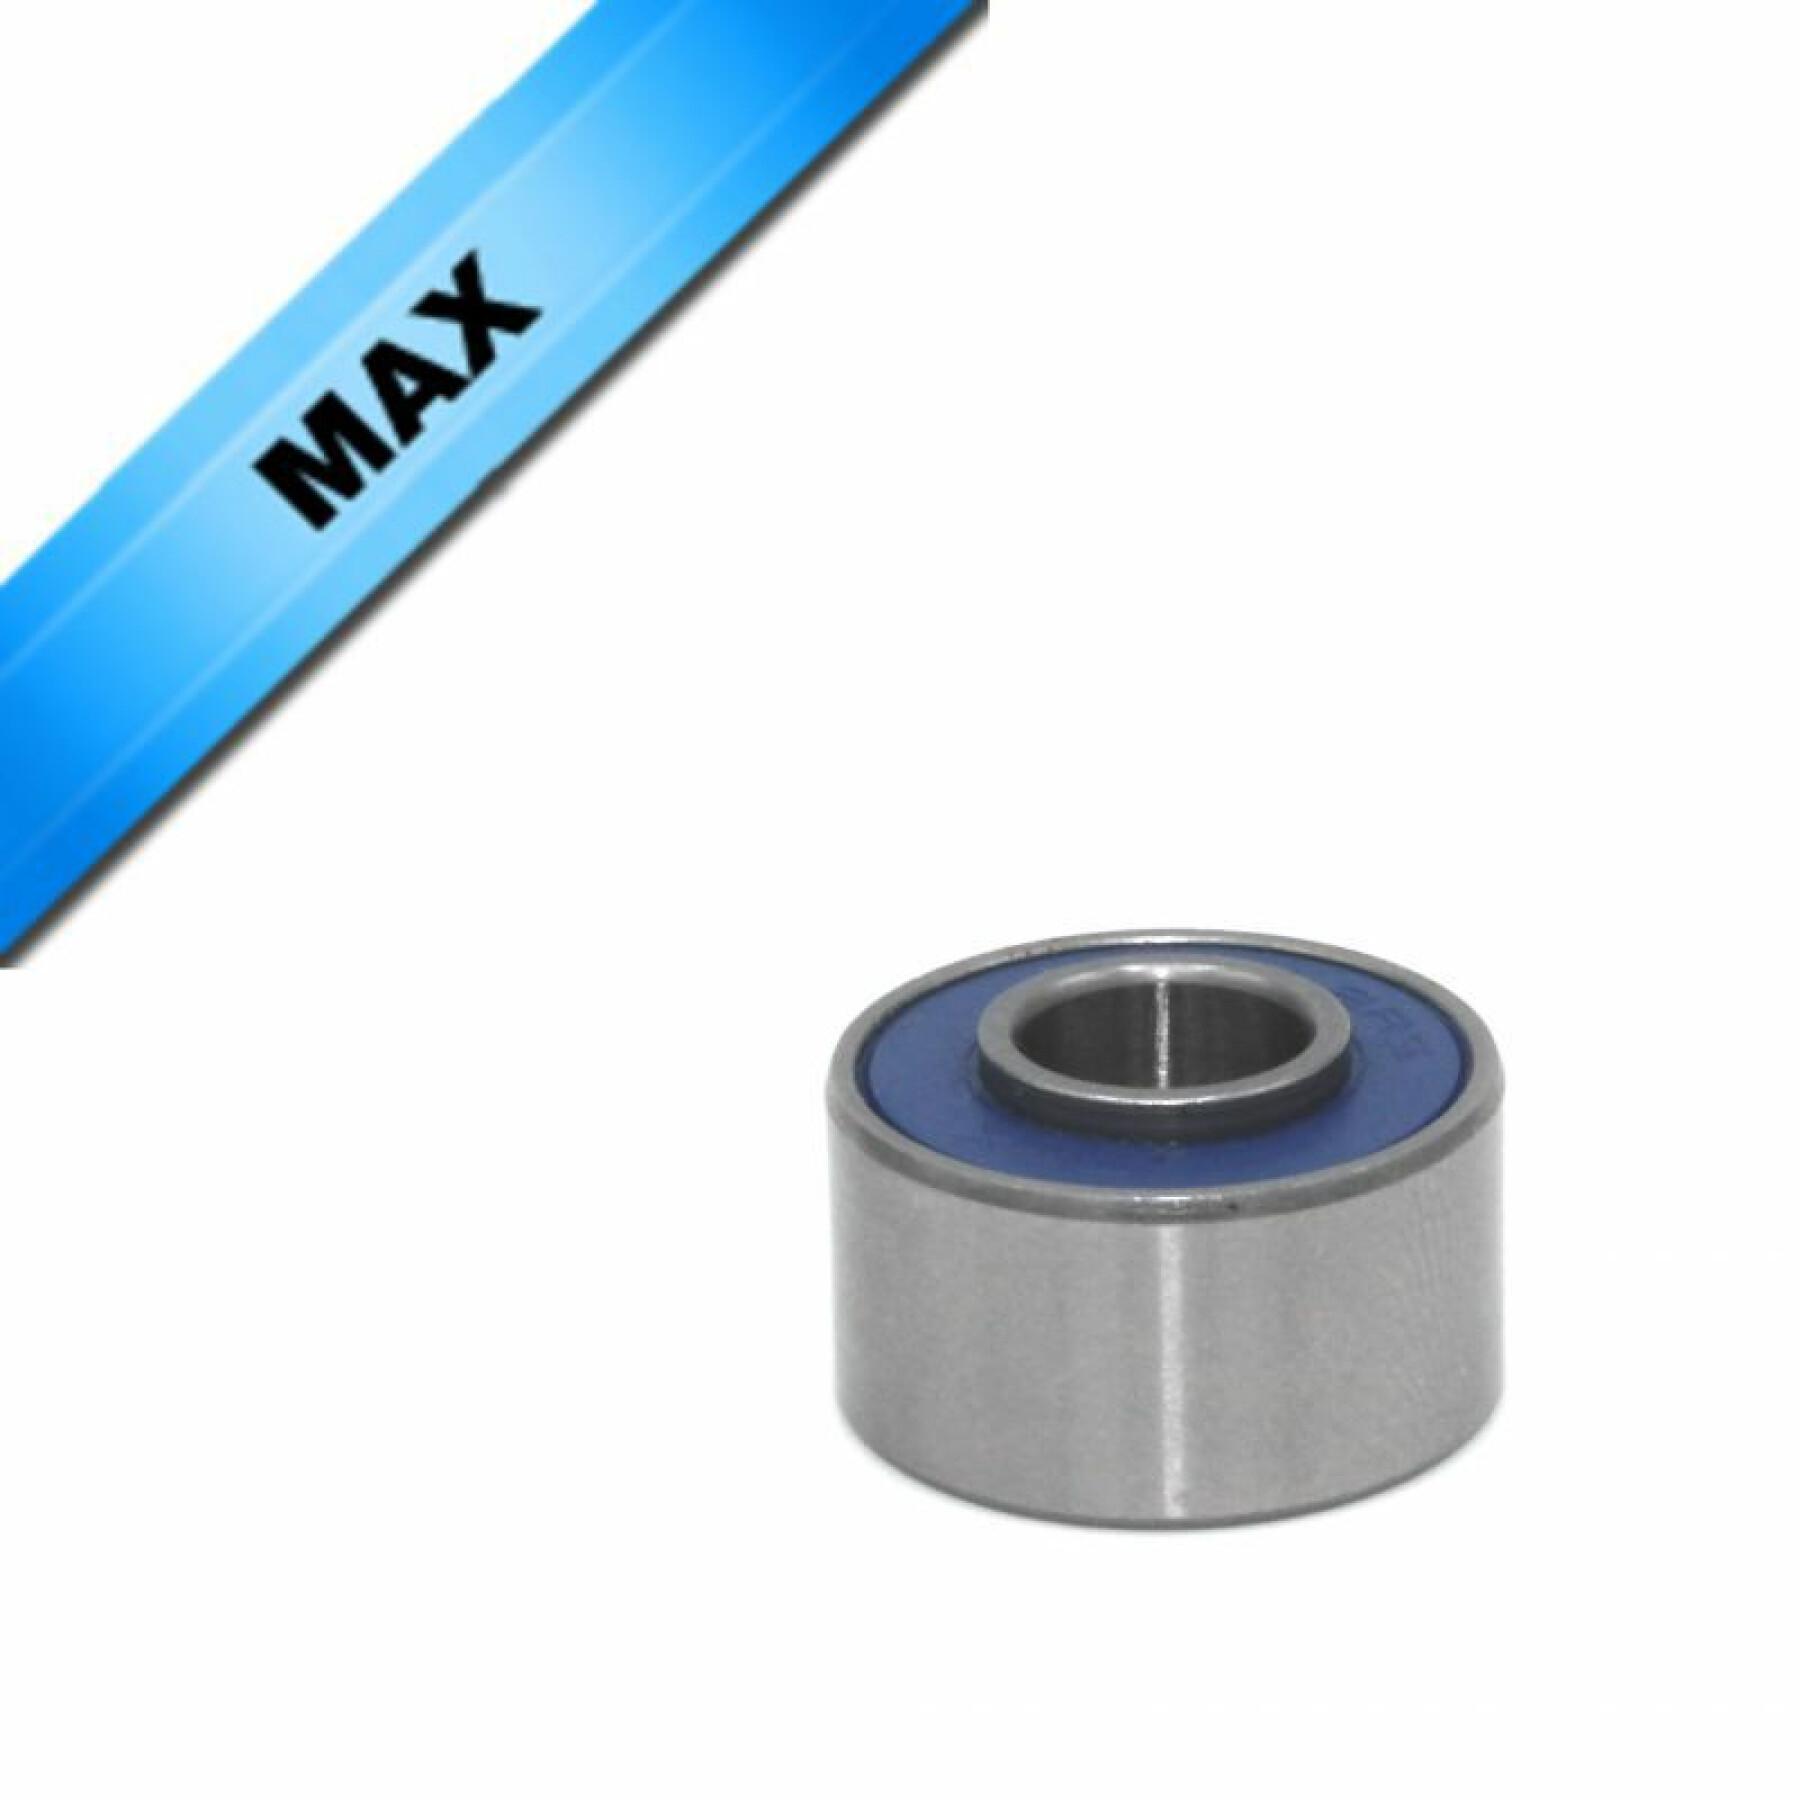 Roulement max Black Bearing MAX - 398-2RS/E - 8 x 19 x 10 / 11 mm